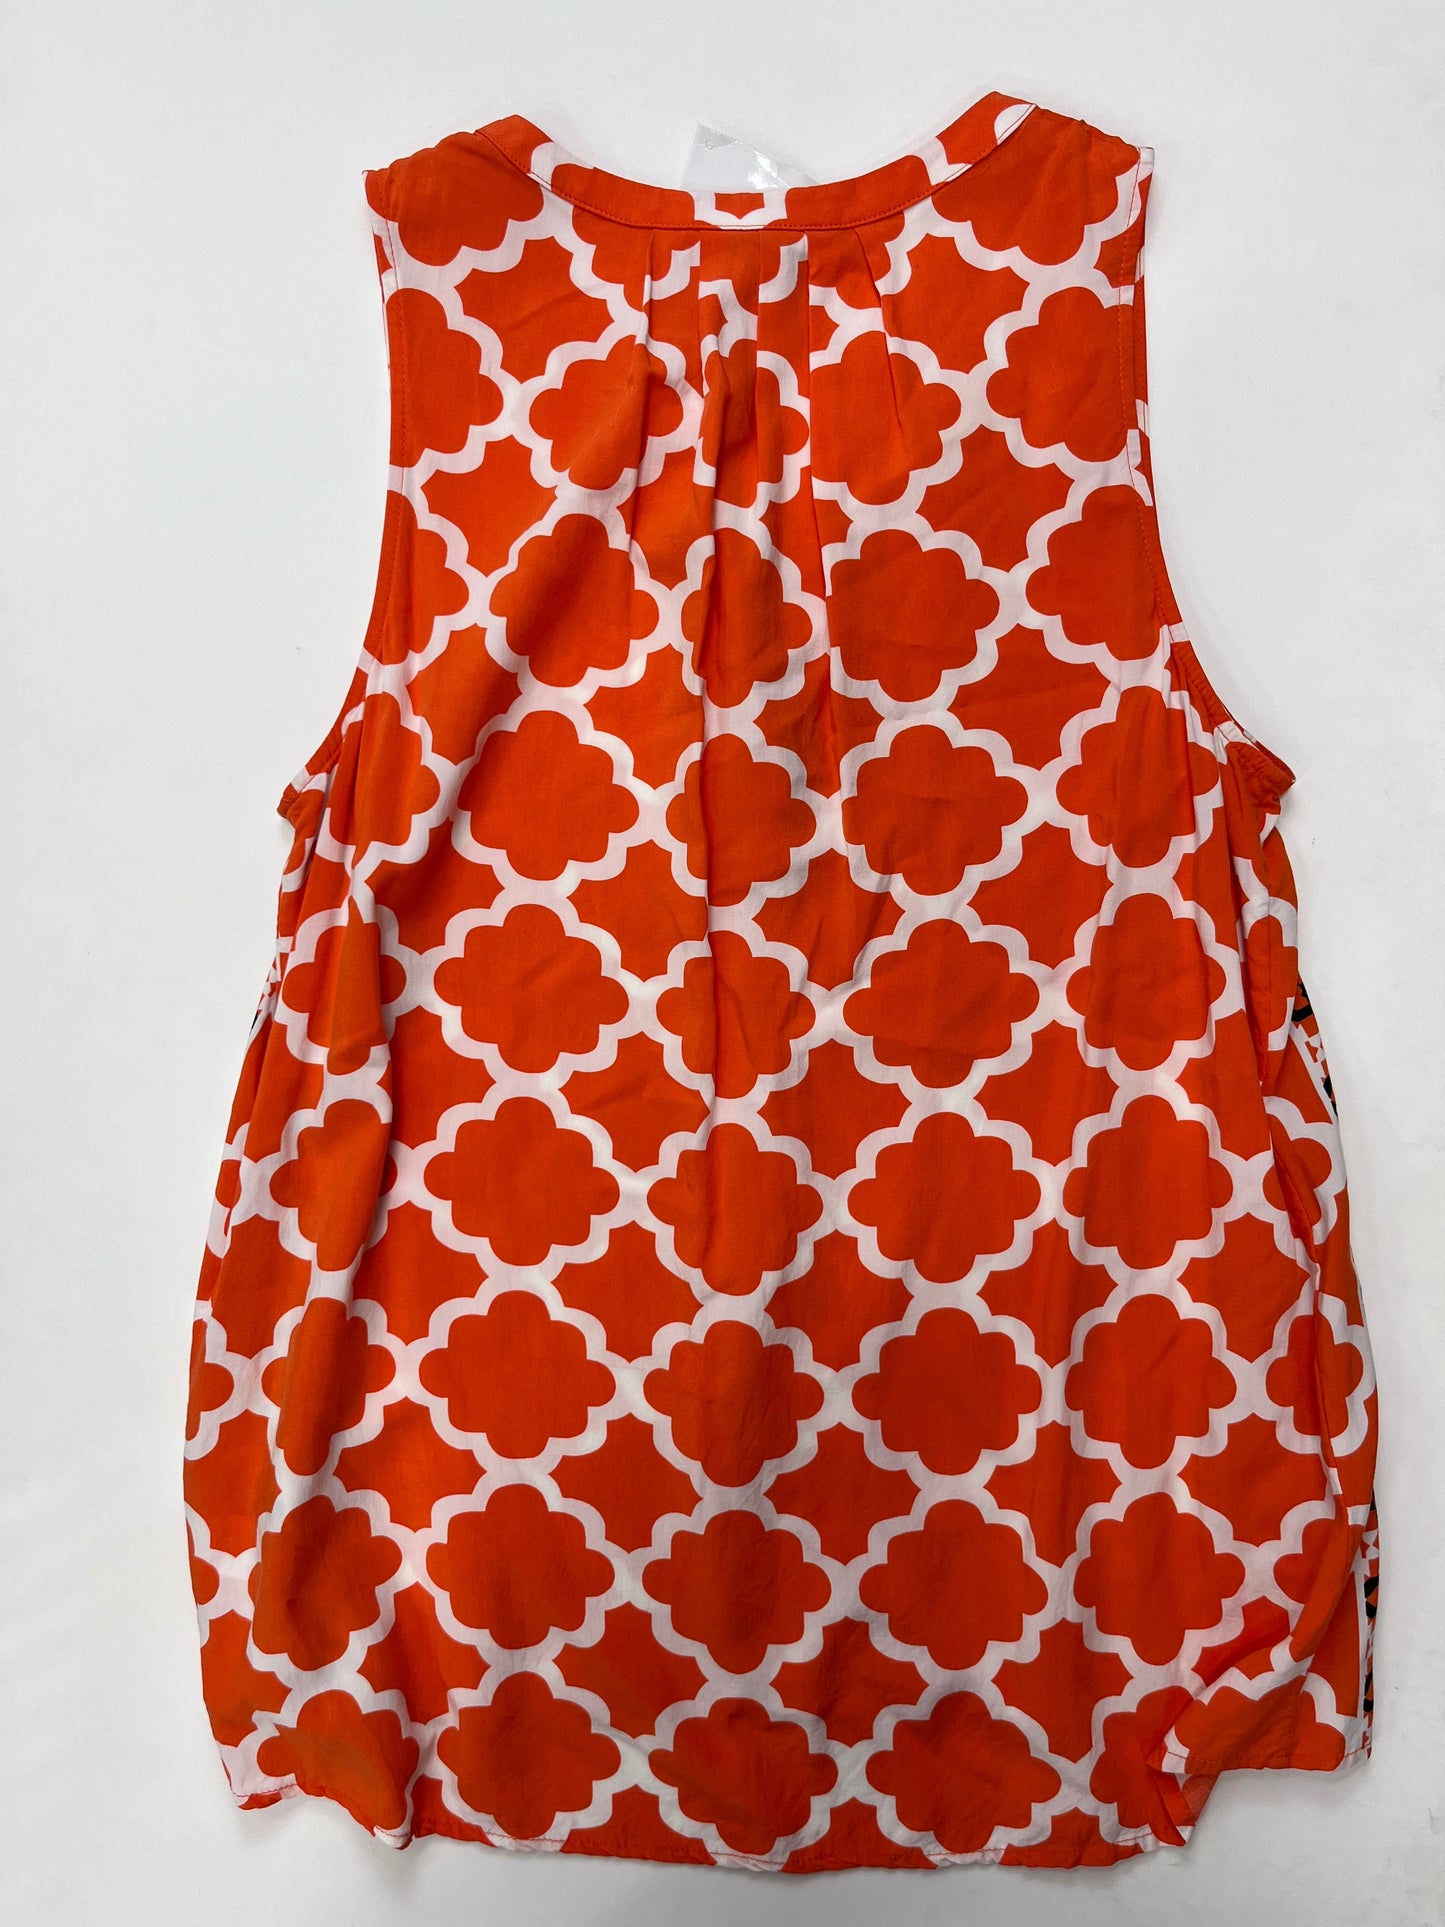 Top Sleeveless By Crown And Ivy  Size: L